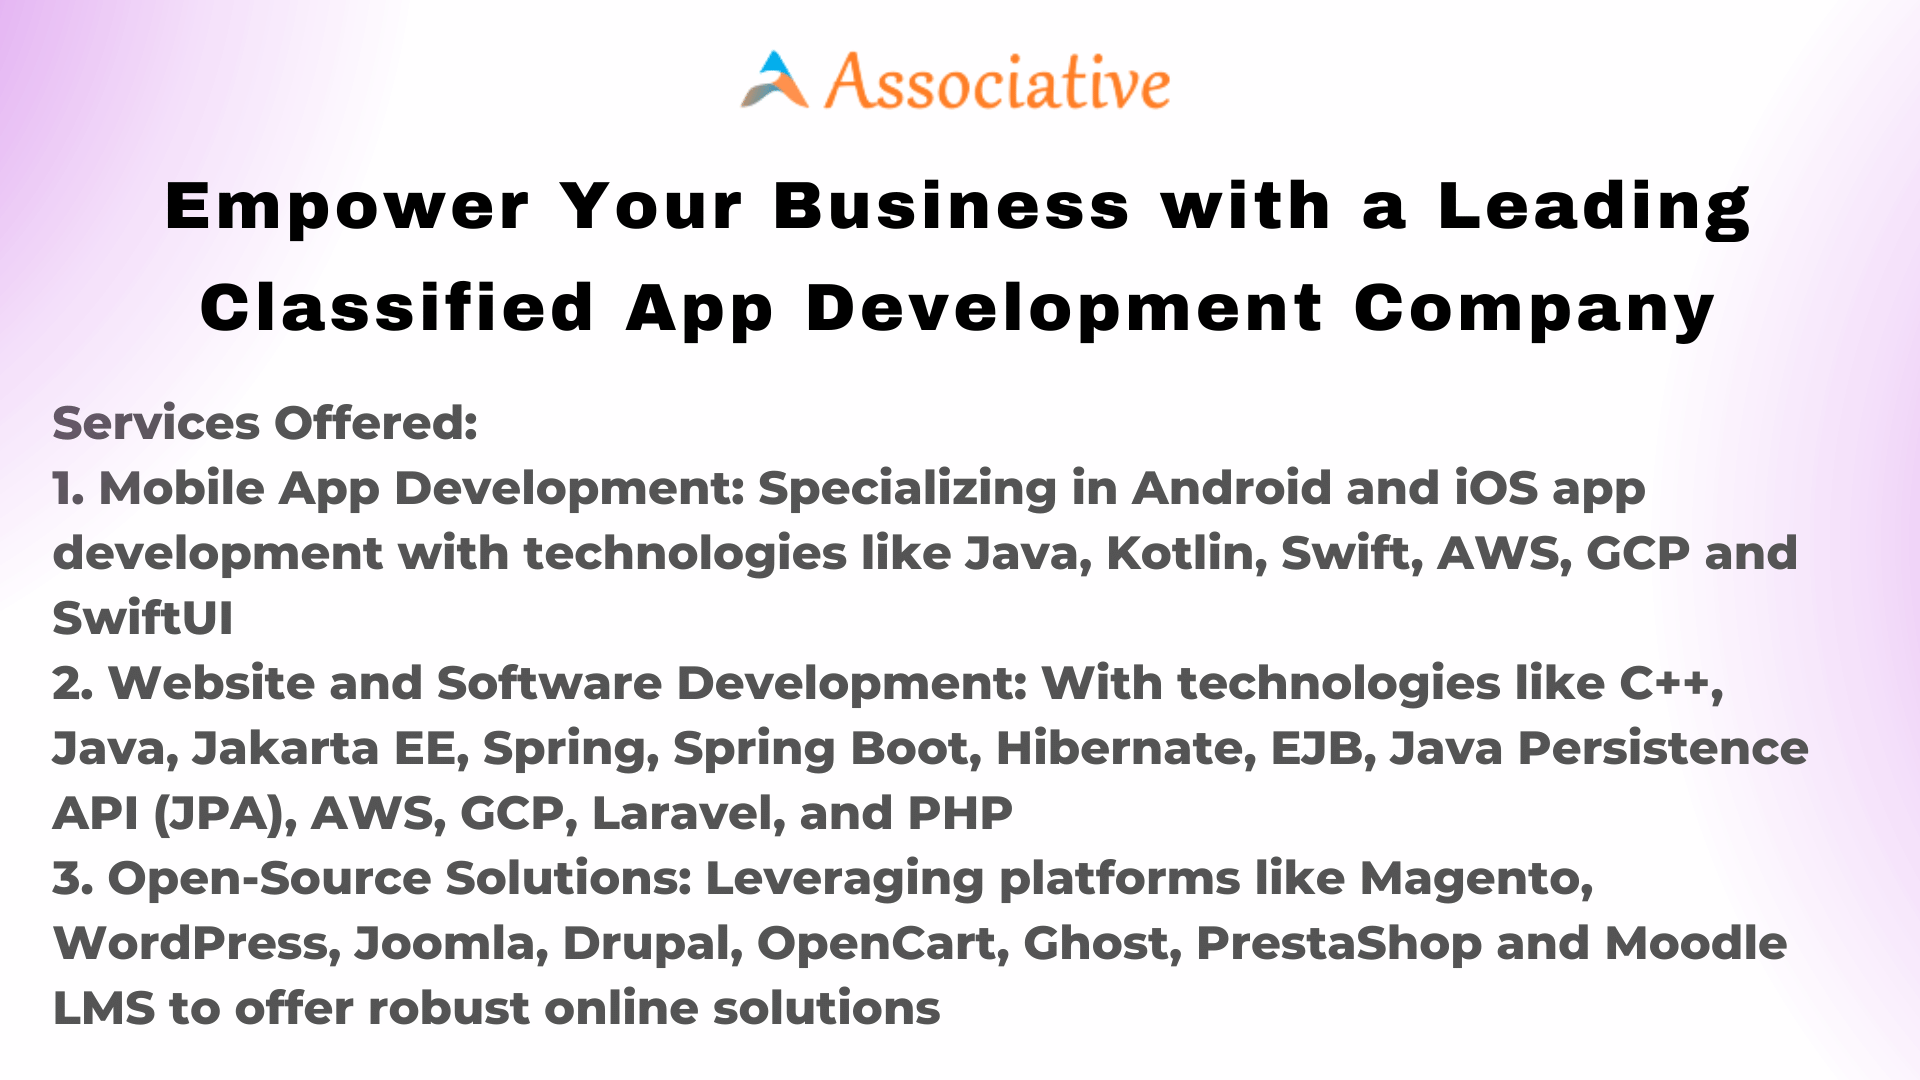 Empower Your Business with a Leading Classified App Development Company